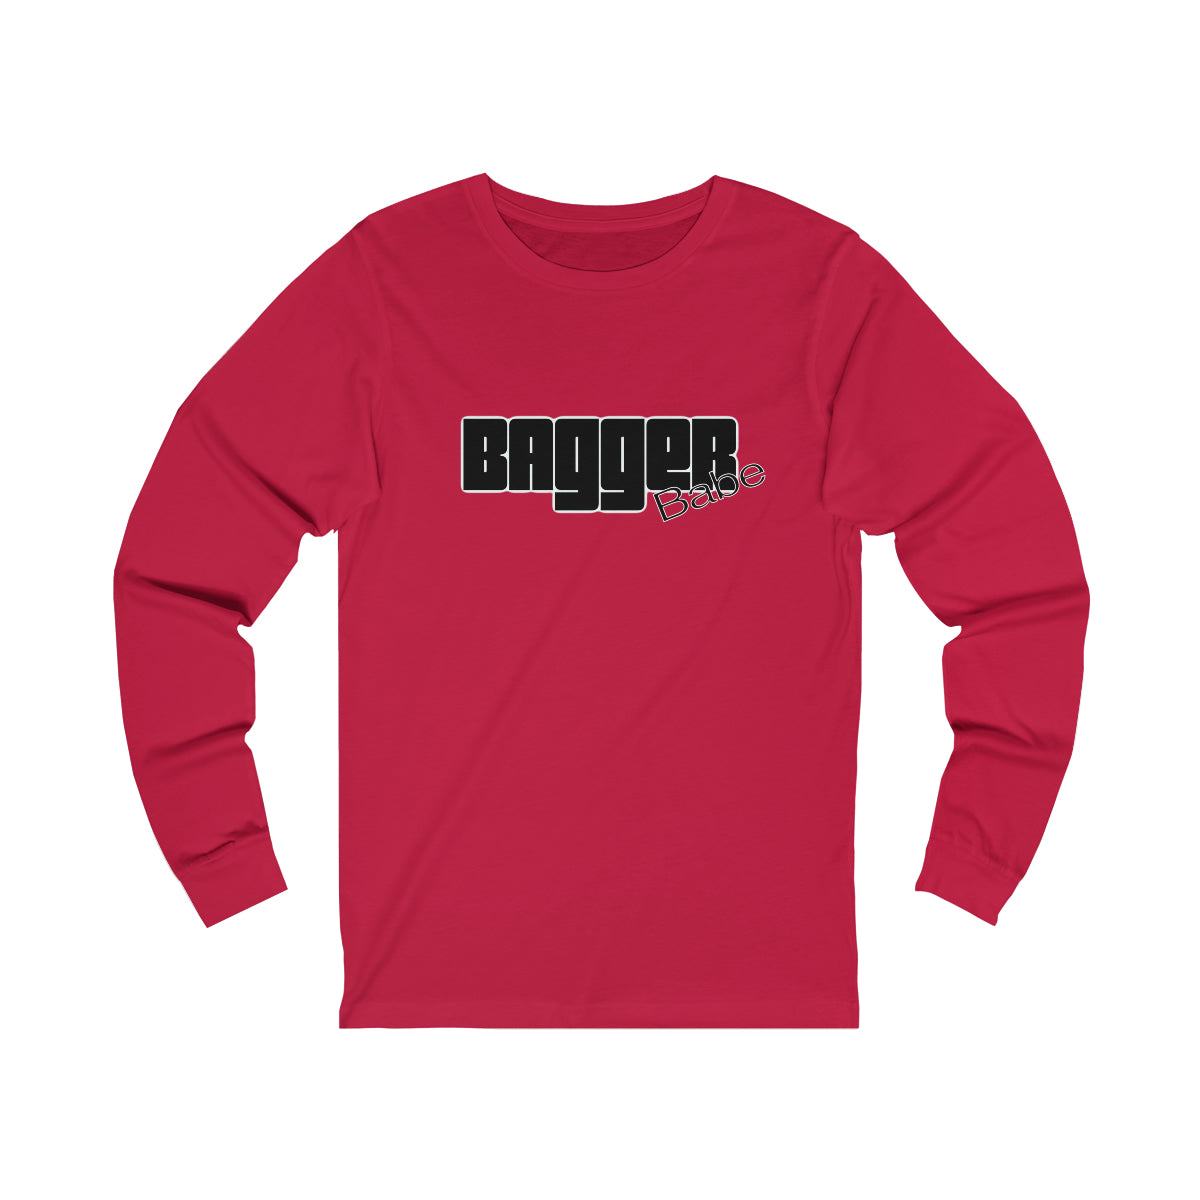 Bagger Babe (Black Letters) Unisex Jersey Long Sleeve Tee